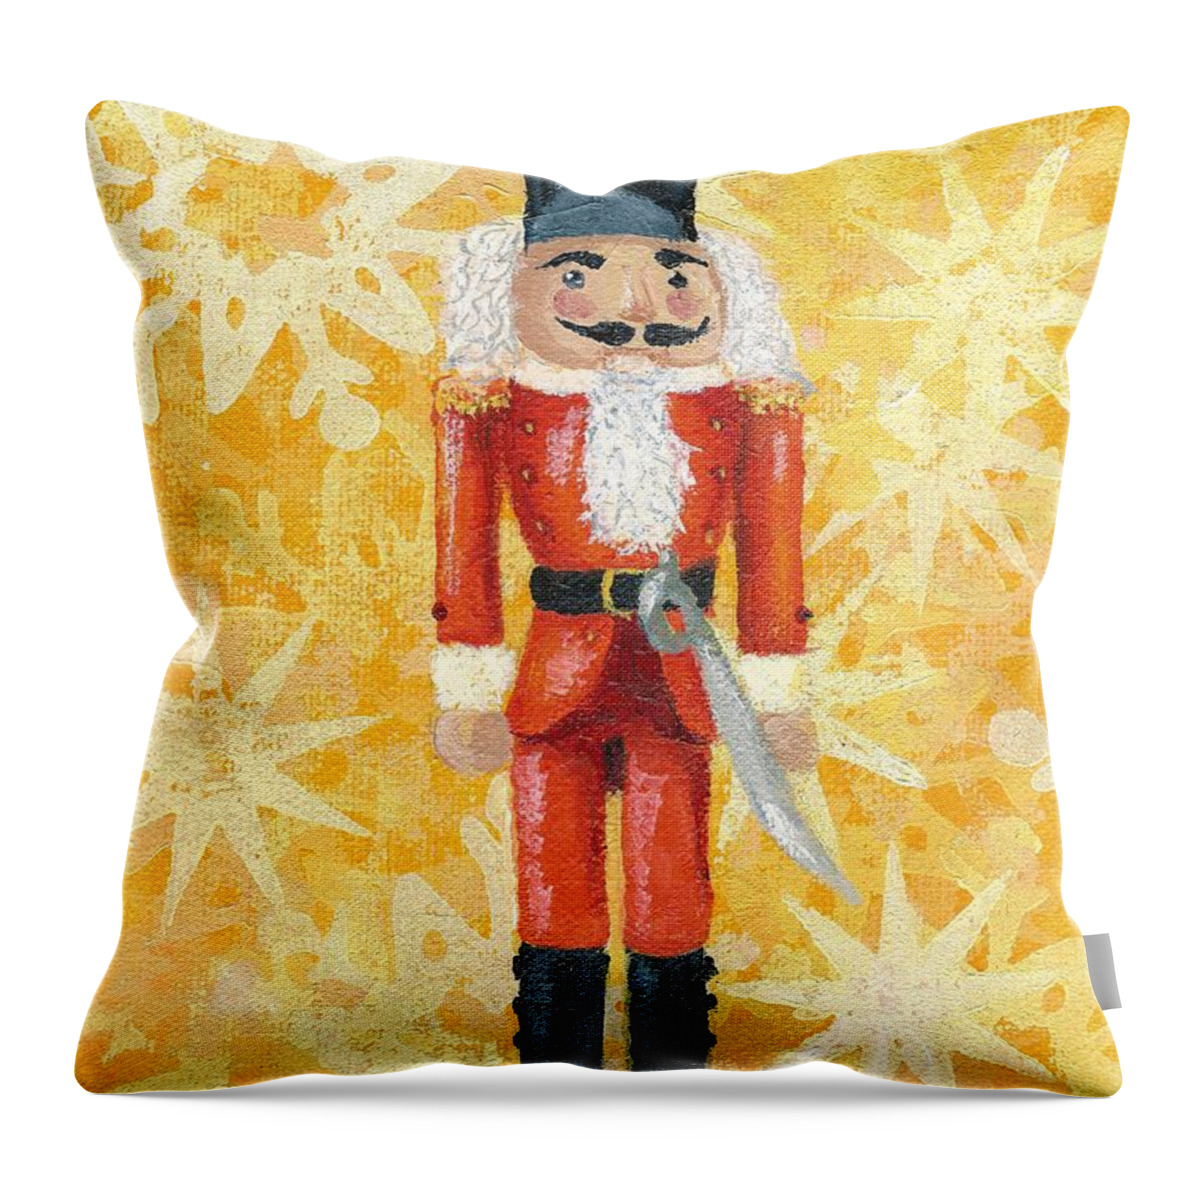 Christmas Throw Pillow featuring the painting Nutcracker by Donna Tucker